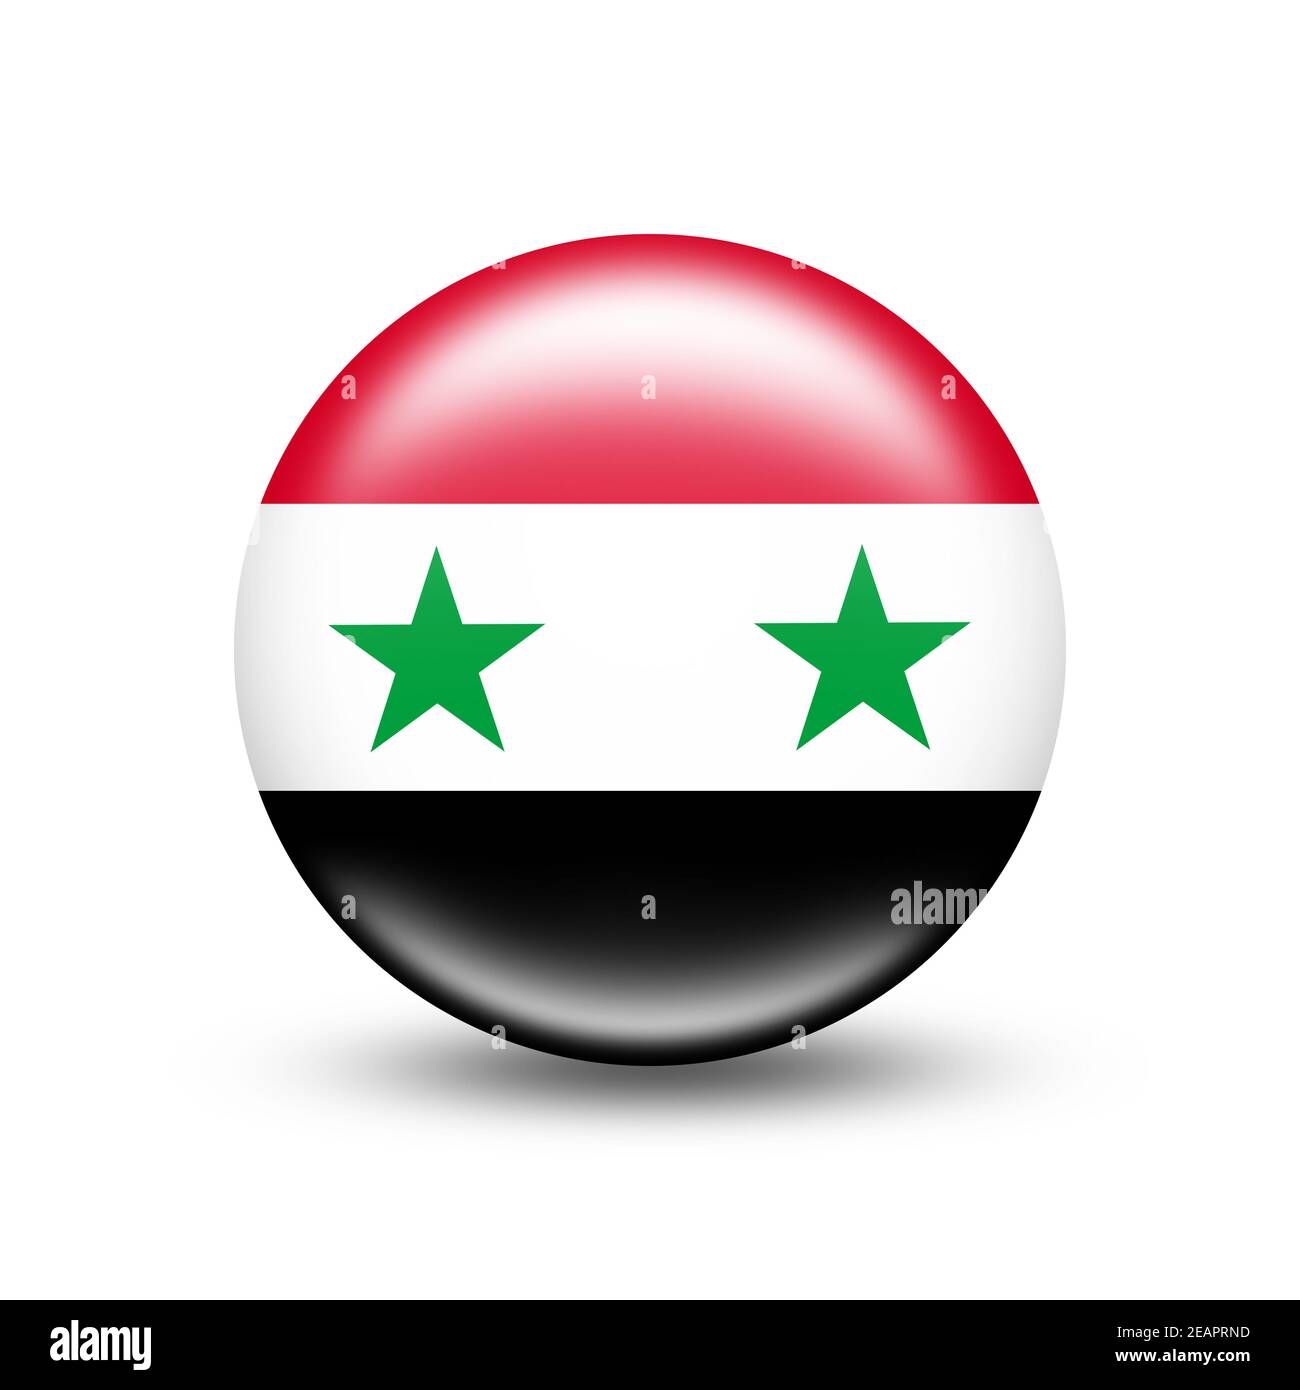 https://c8.alamy.com/comp/2EAPRND/syria-country-flag-in-sphere-with-white-shadow-2EAPRND.jpg